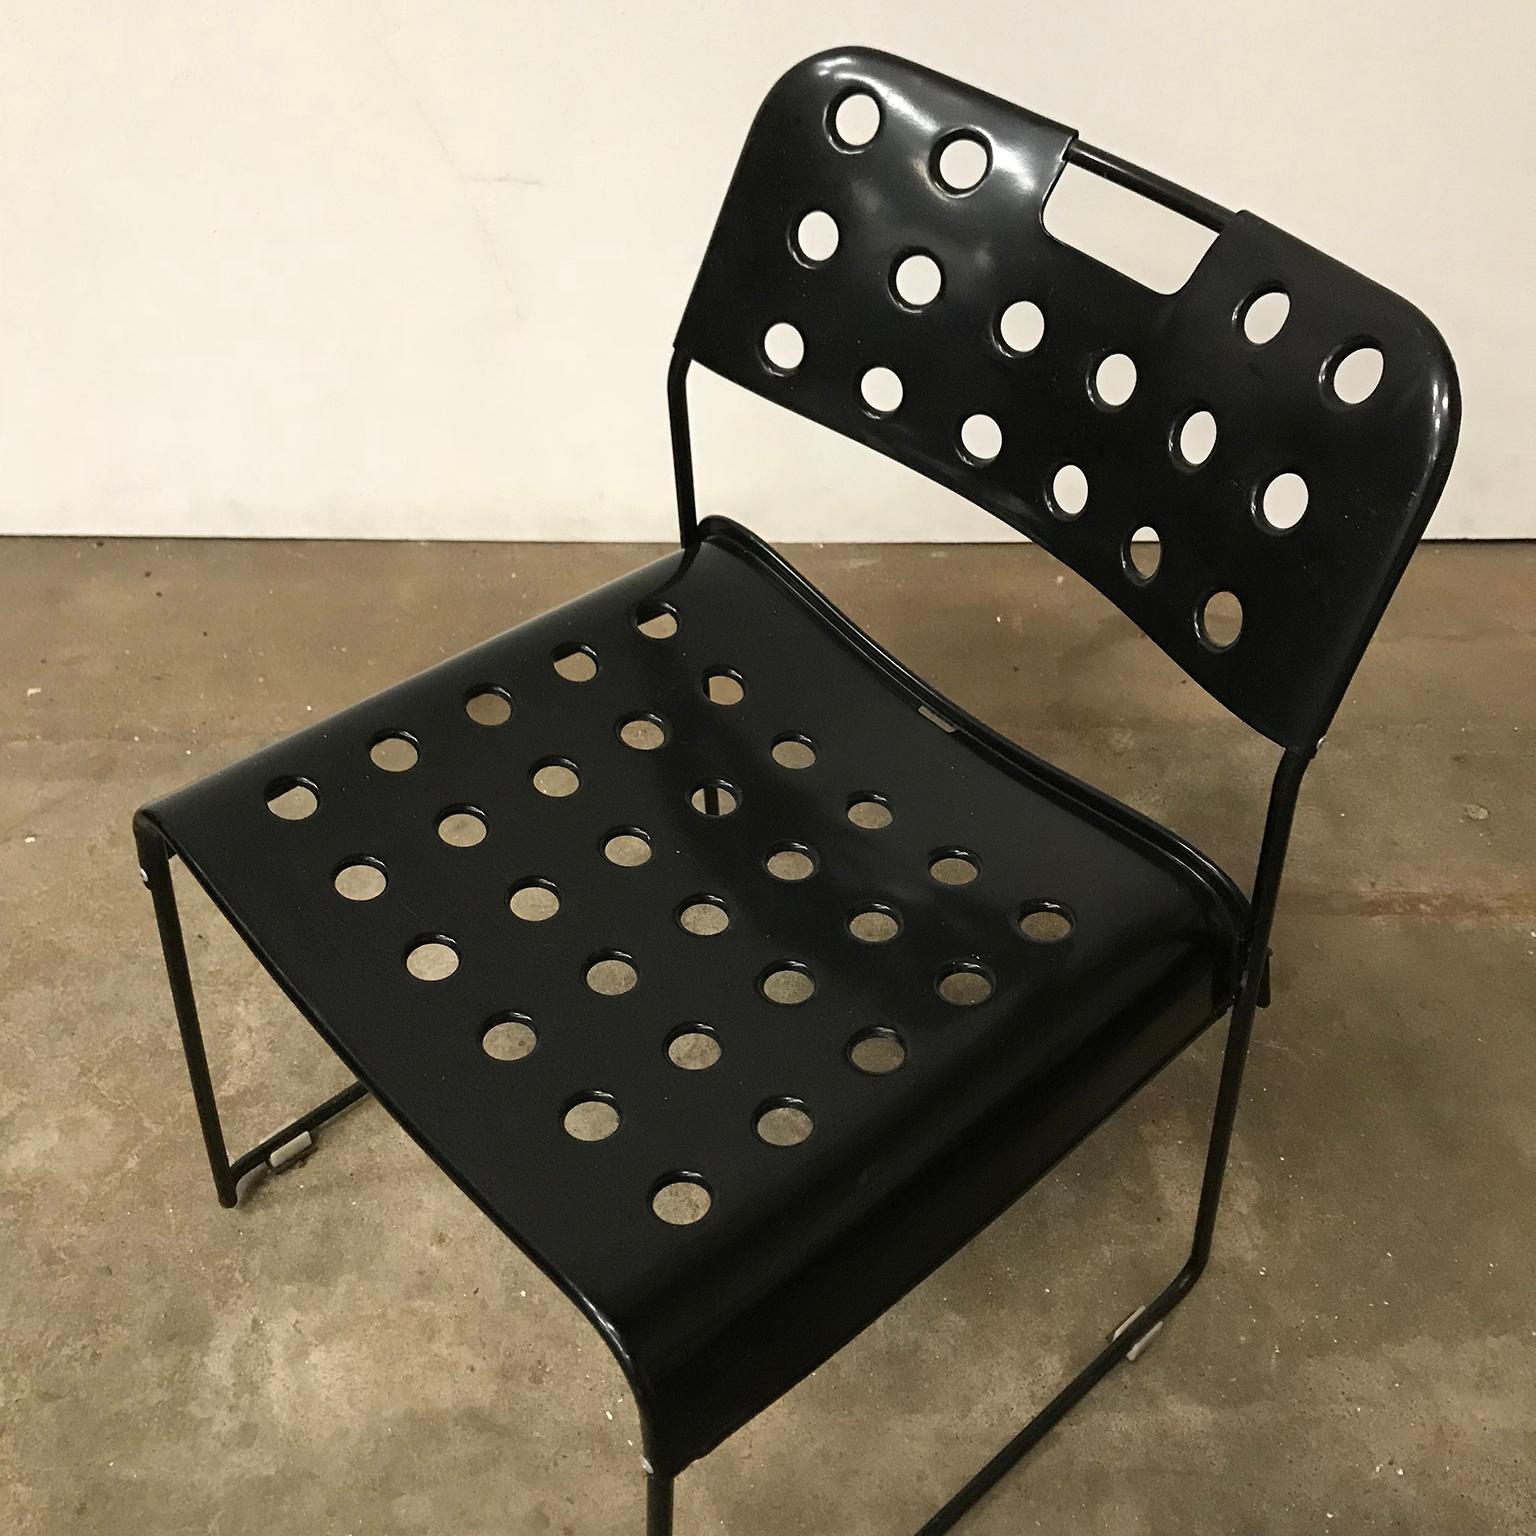 1971, Rodney Kinsman, Set of Rare All Black, Incl. Frame, Omstak Stacking Chairs 3